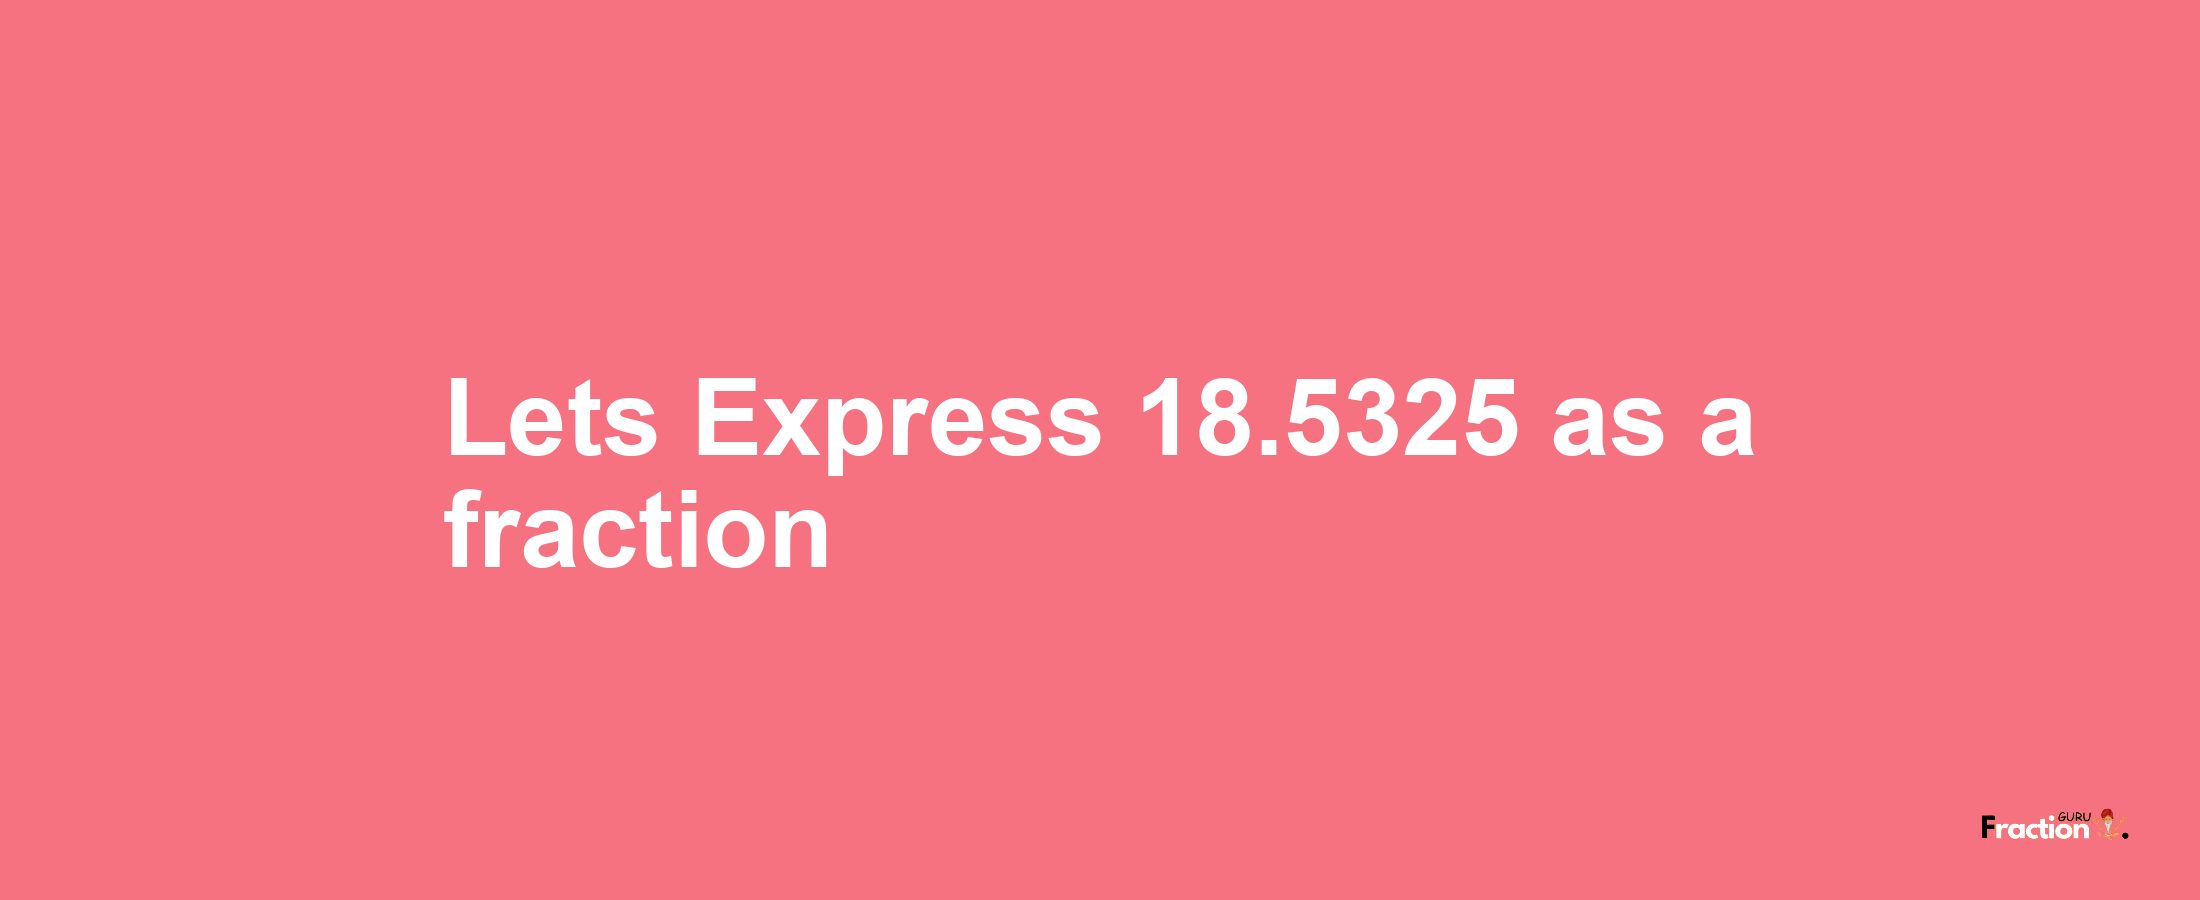 Lets Express 18.5325 as afraction